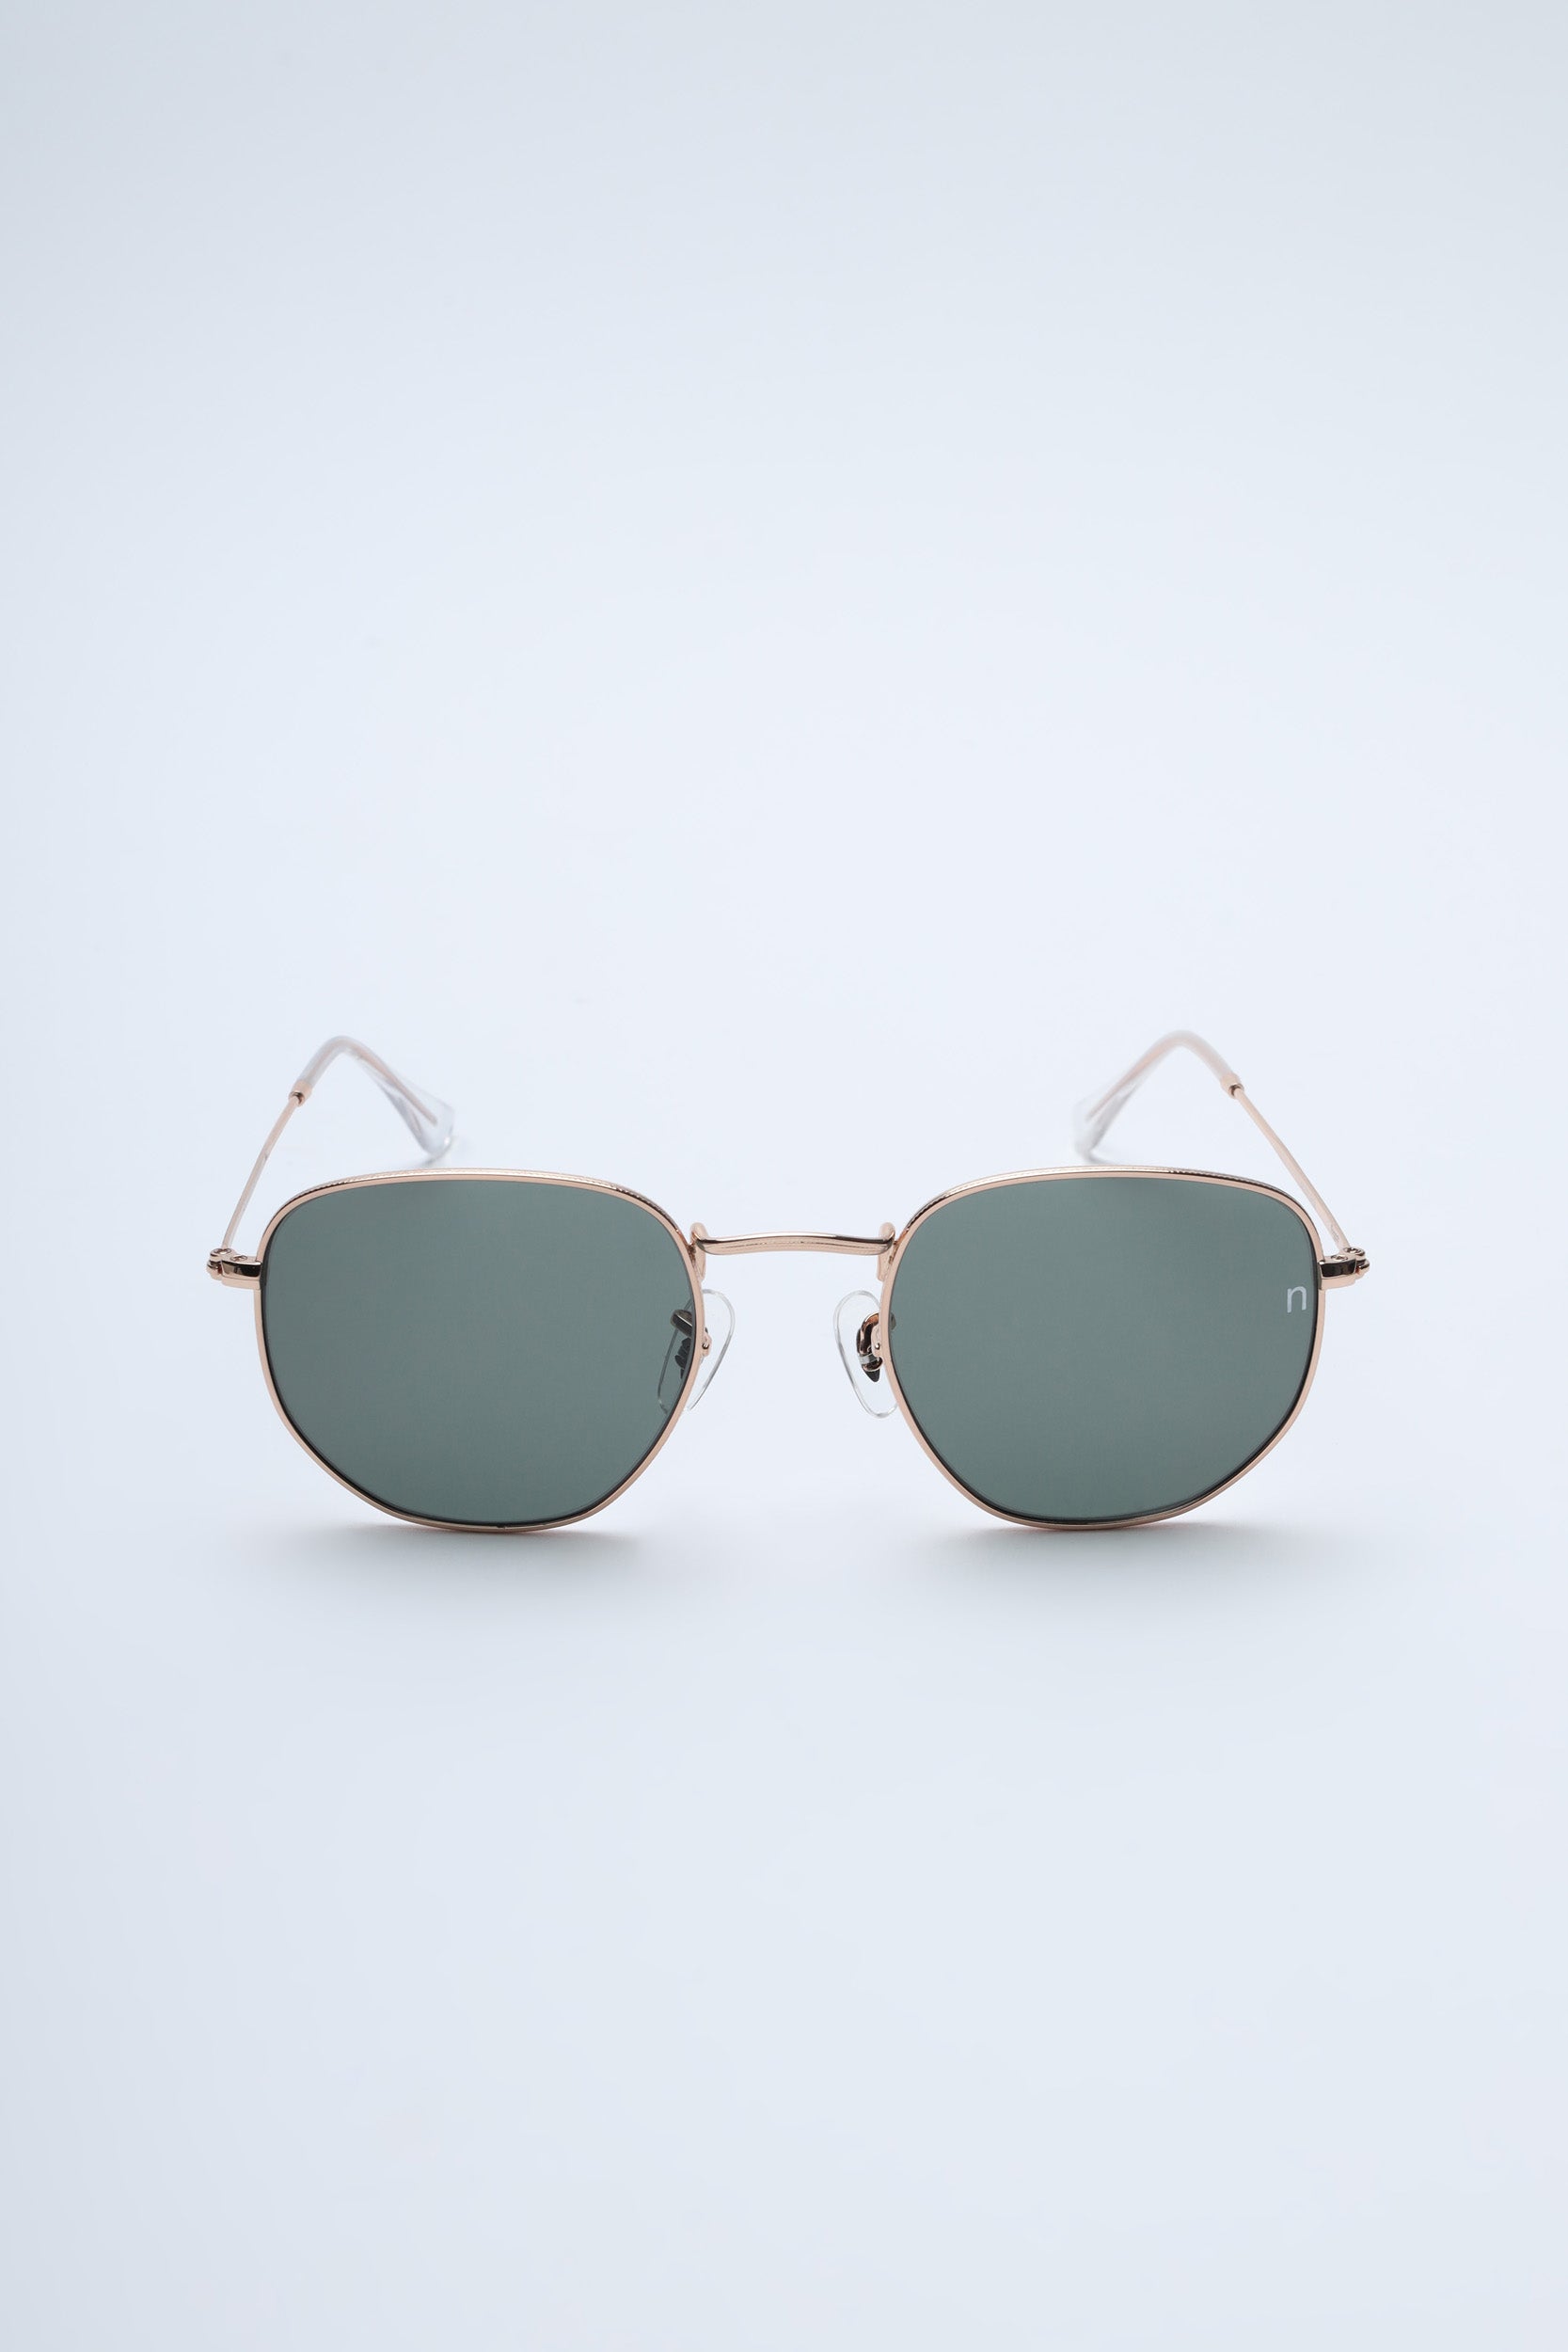 NS2007GFGL Stainless Steel Gold Frame with Green Glass Lens Sunglasses